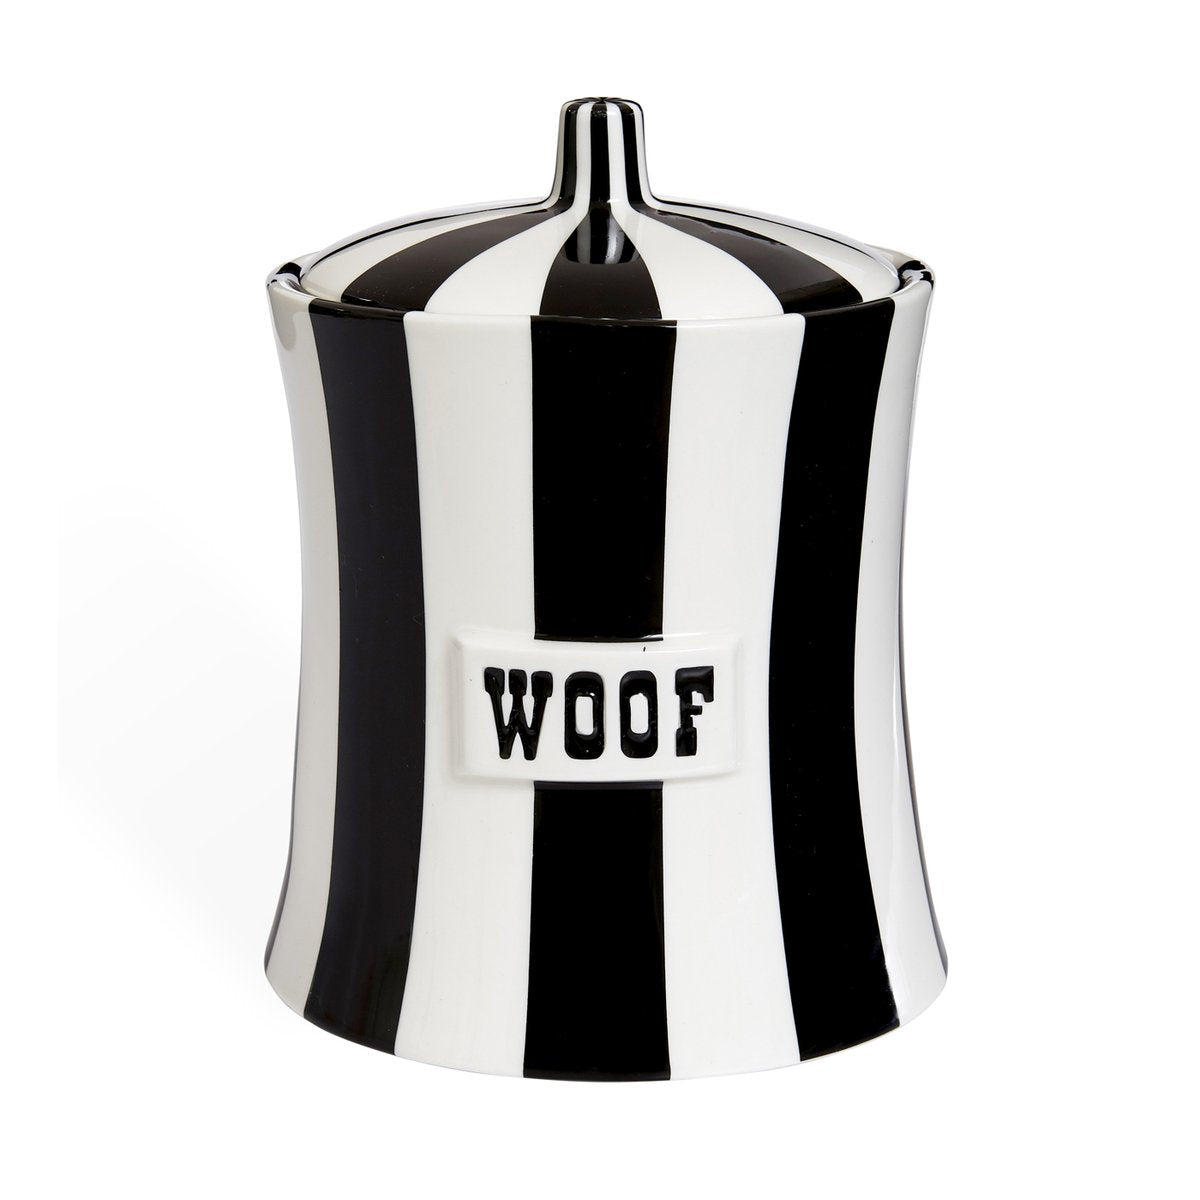 Vice Woof Canister by Jonathan Adler